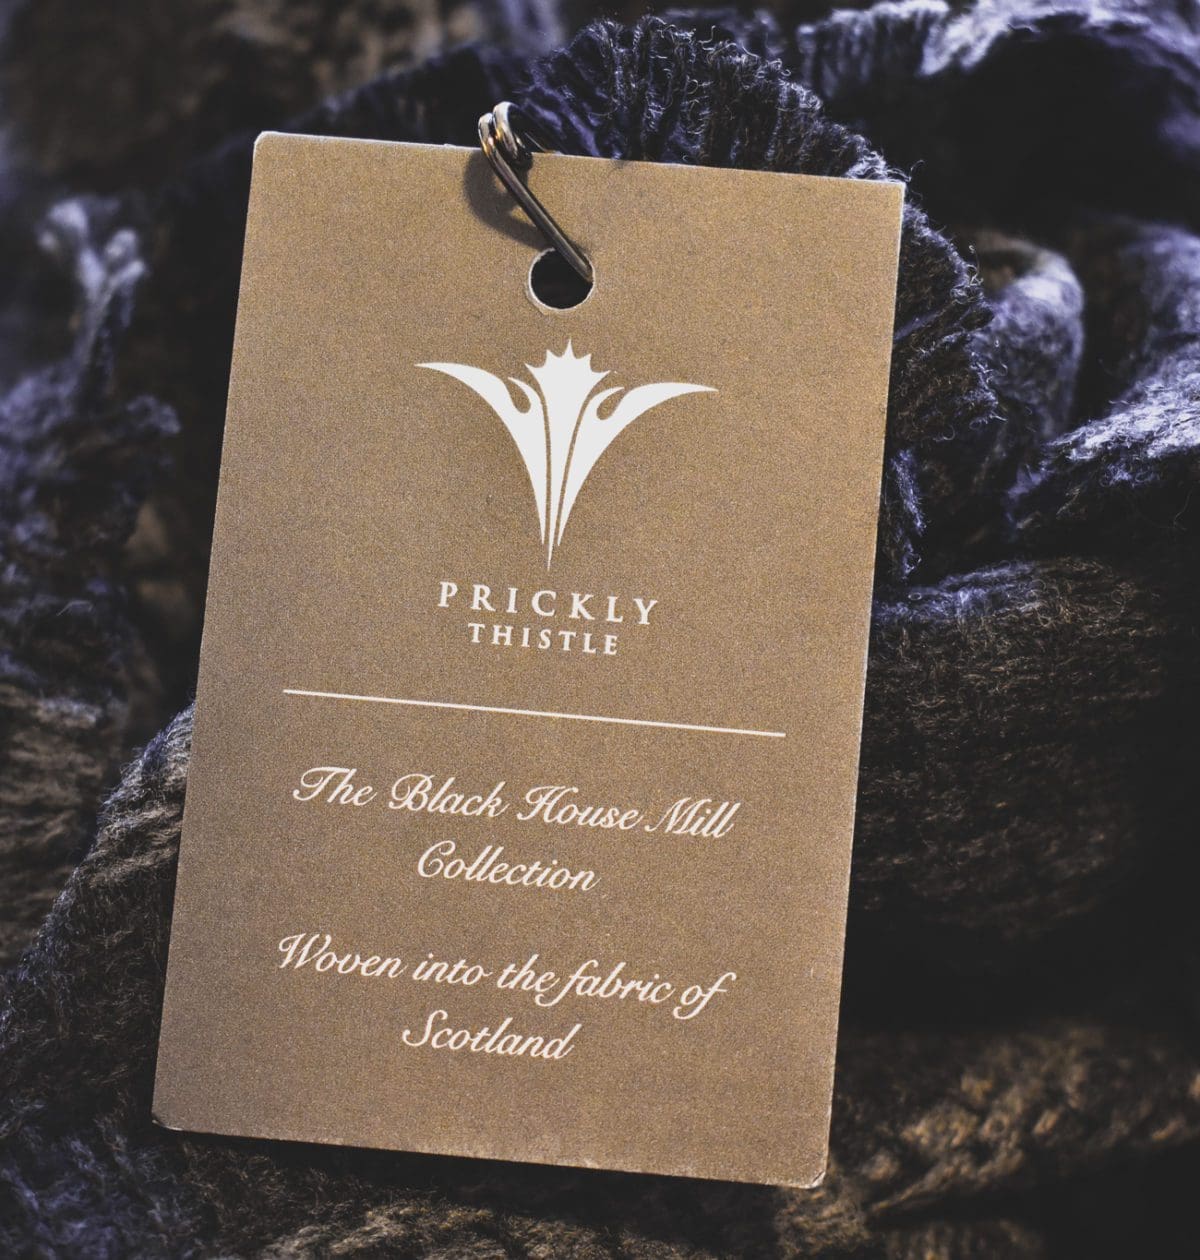 Prickly Thistle is the only tartan weaving mill in the Highland region of Scotland, and they have been working to build a home for their operation for a few years now. Read about why this Mill is so special to me and learn more about their process here!